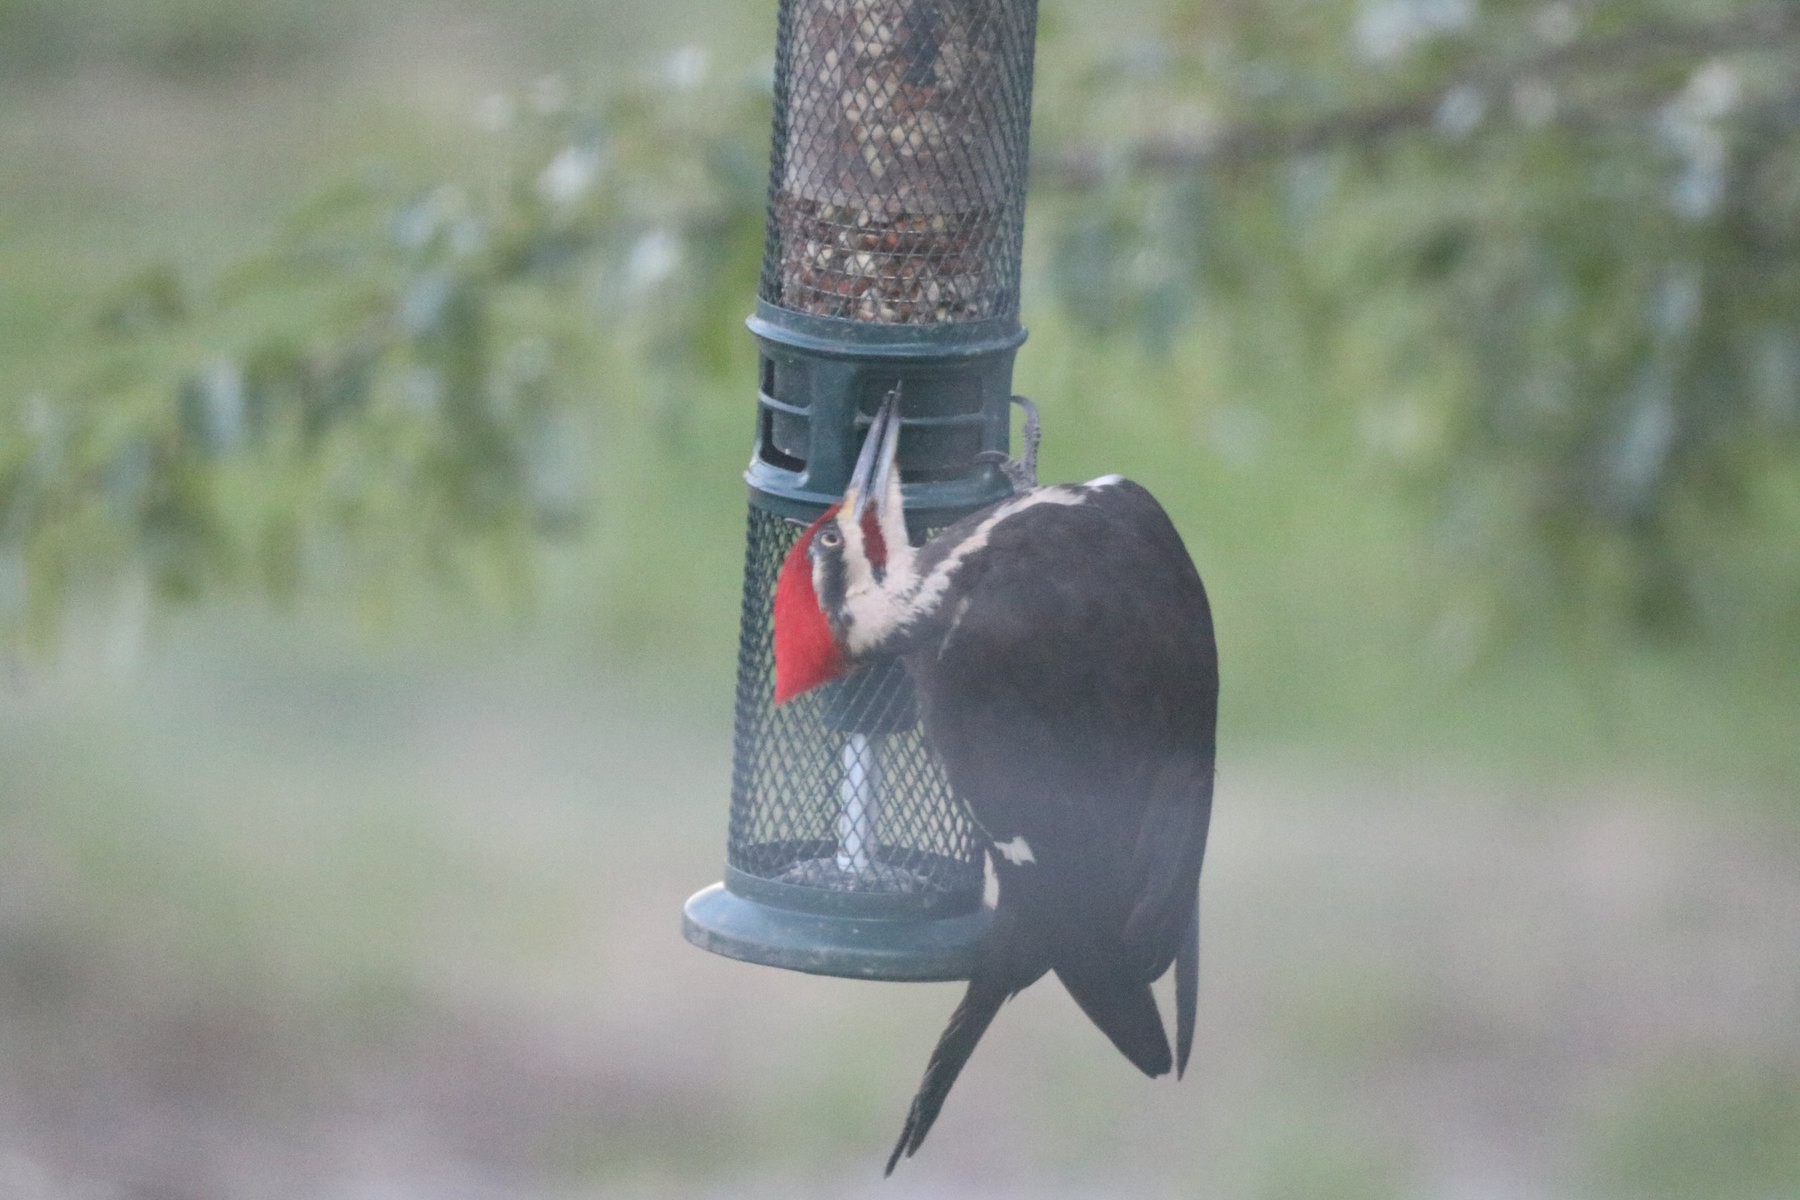 pileated woodpecler twisiting its head upside down to reach nuts in a feeder